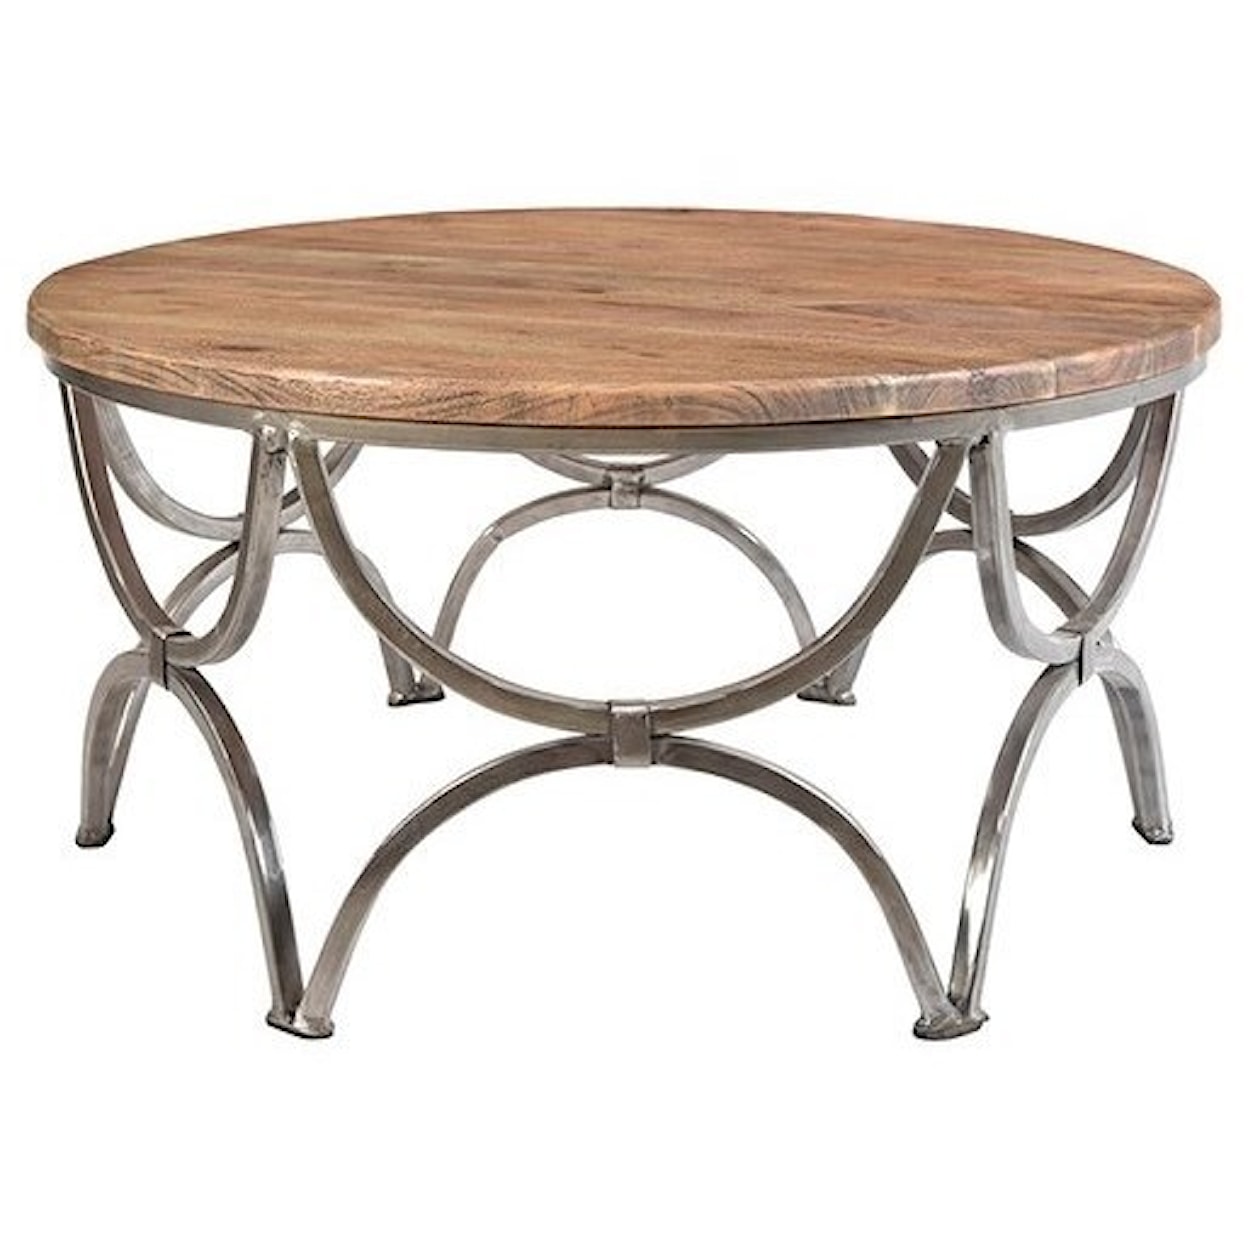 Crestview Collection Accent Furniture Bengal Manor Mango Wood and Steel Round Cock